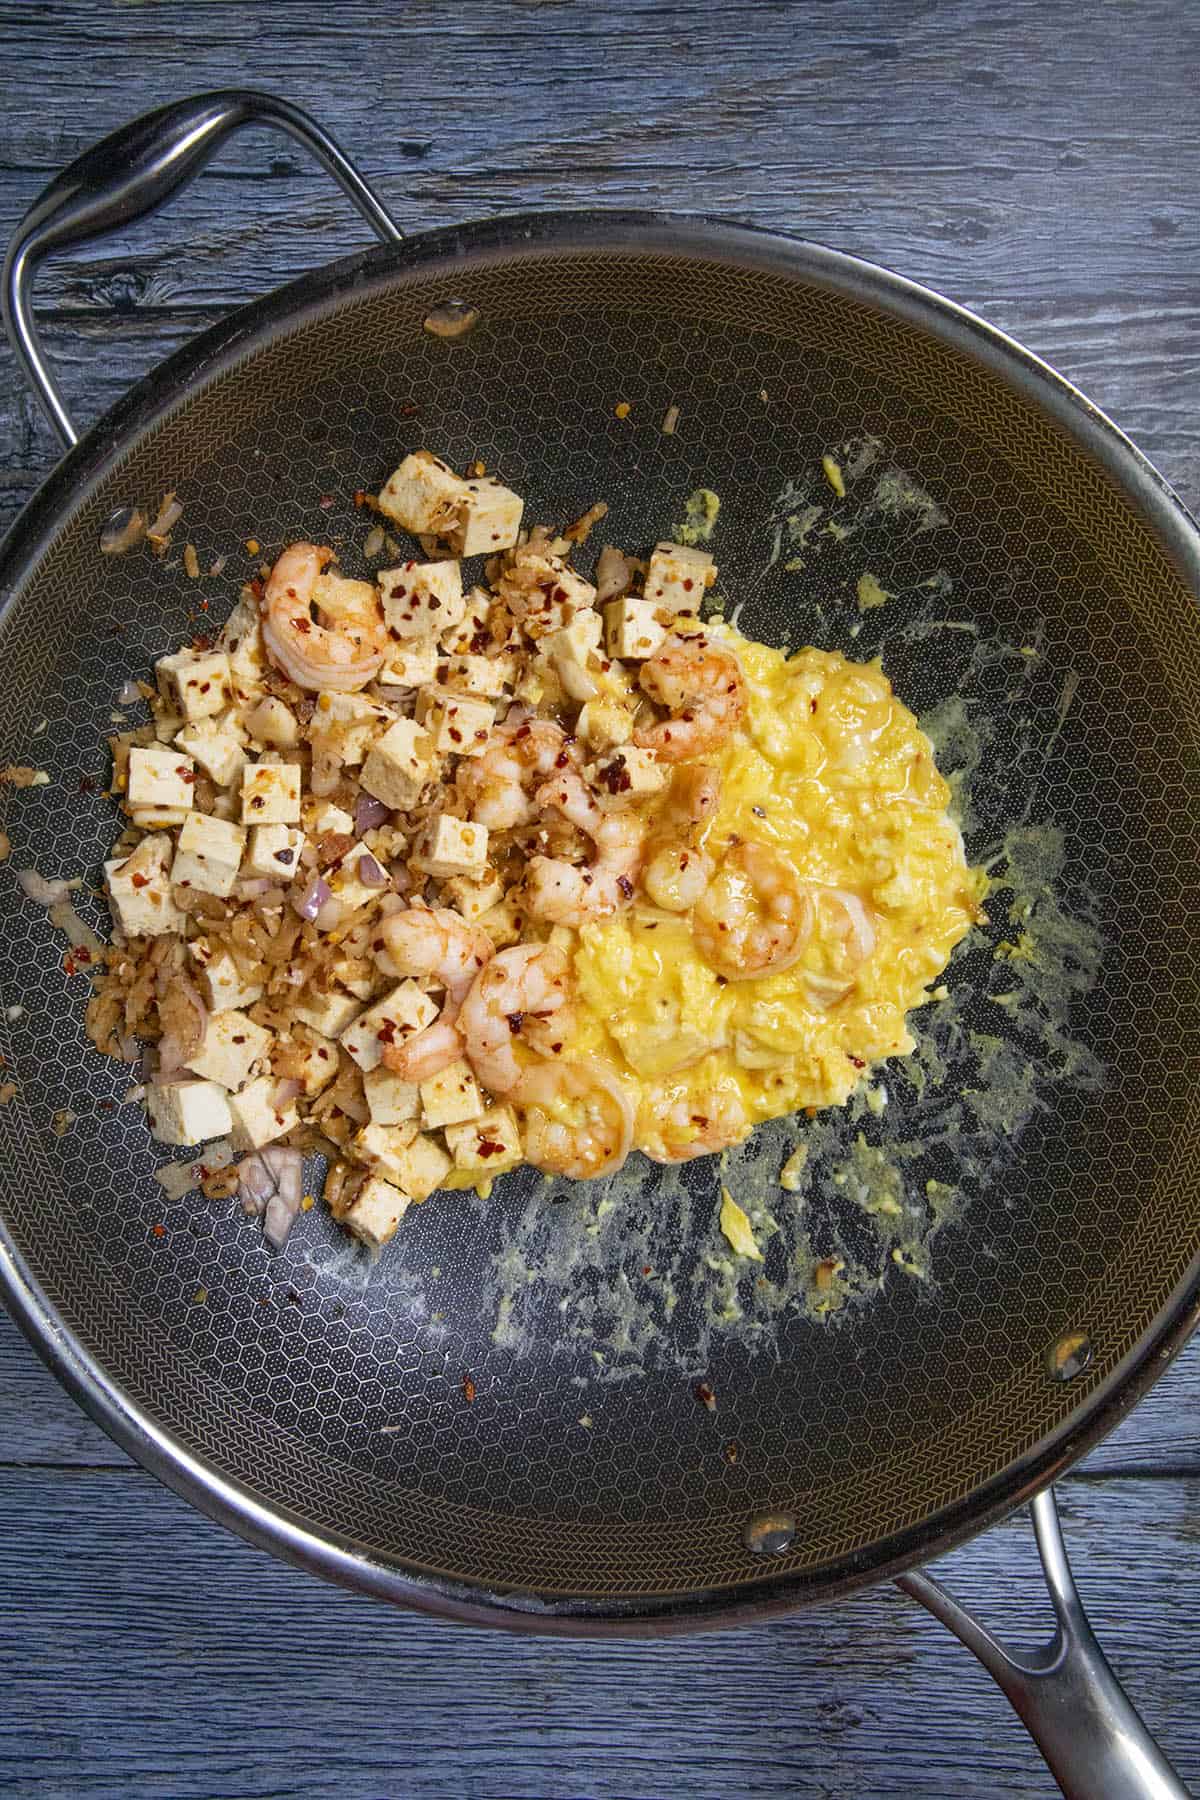 Stirring the eggs into the pan of Pad Thai